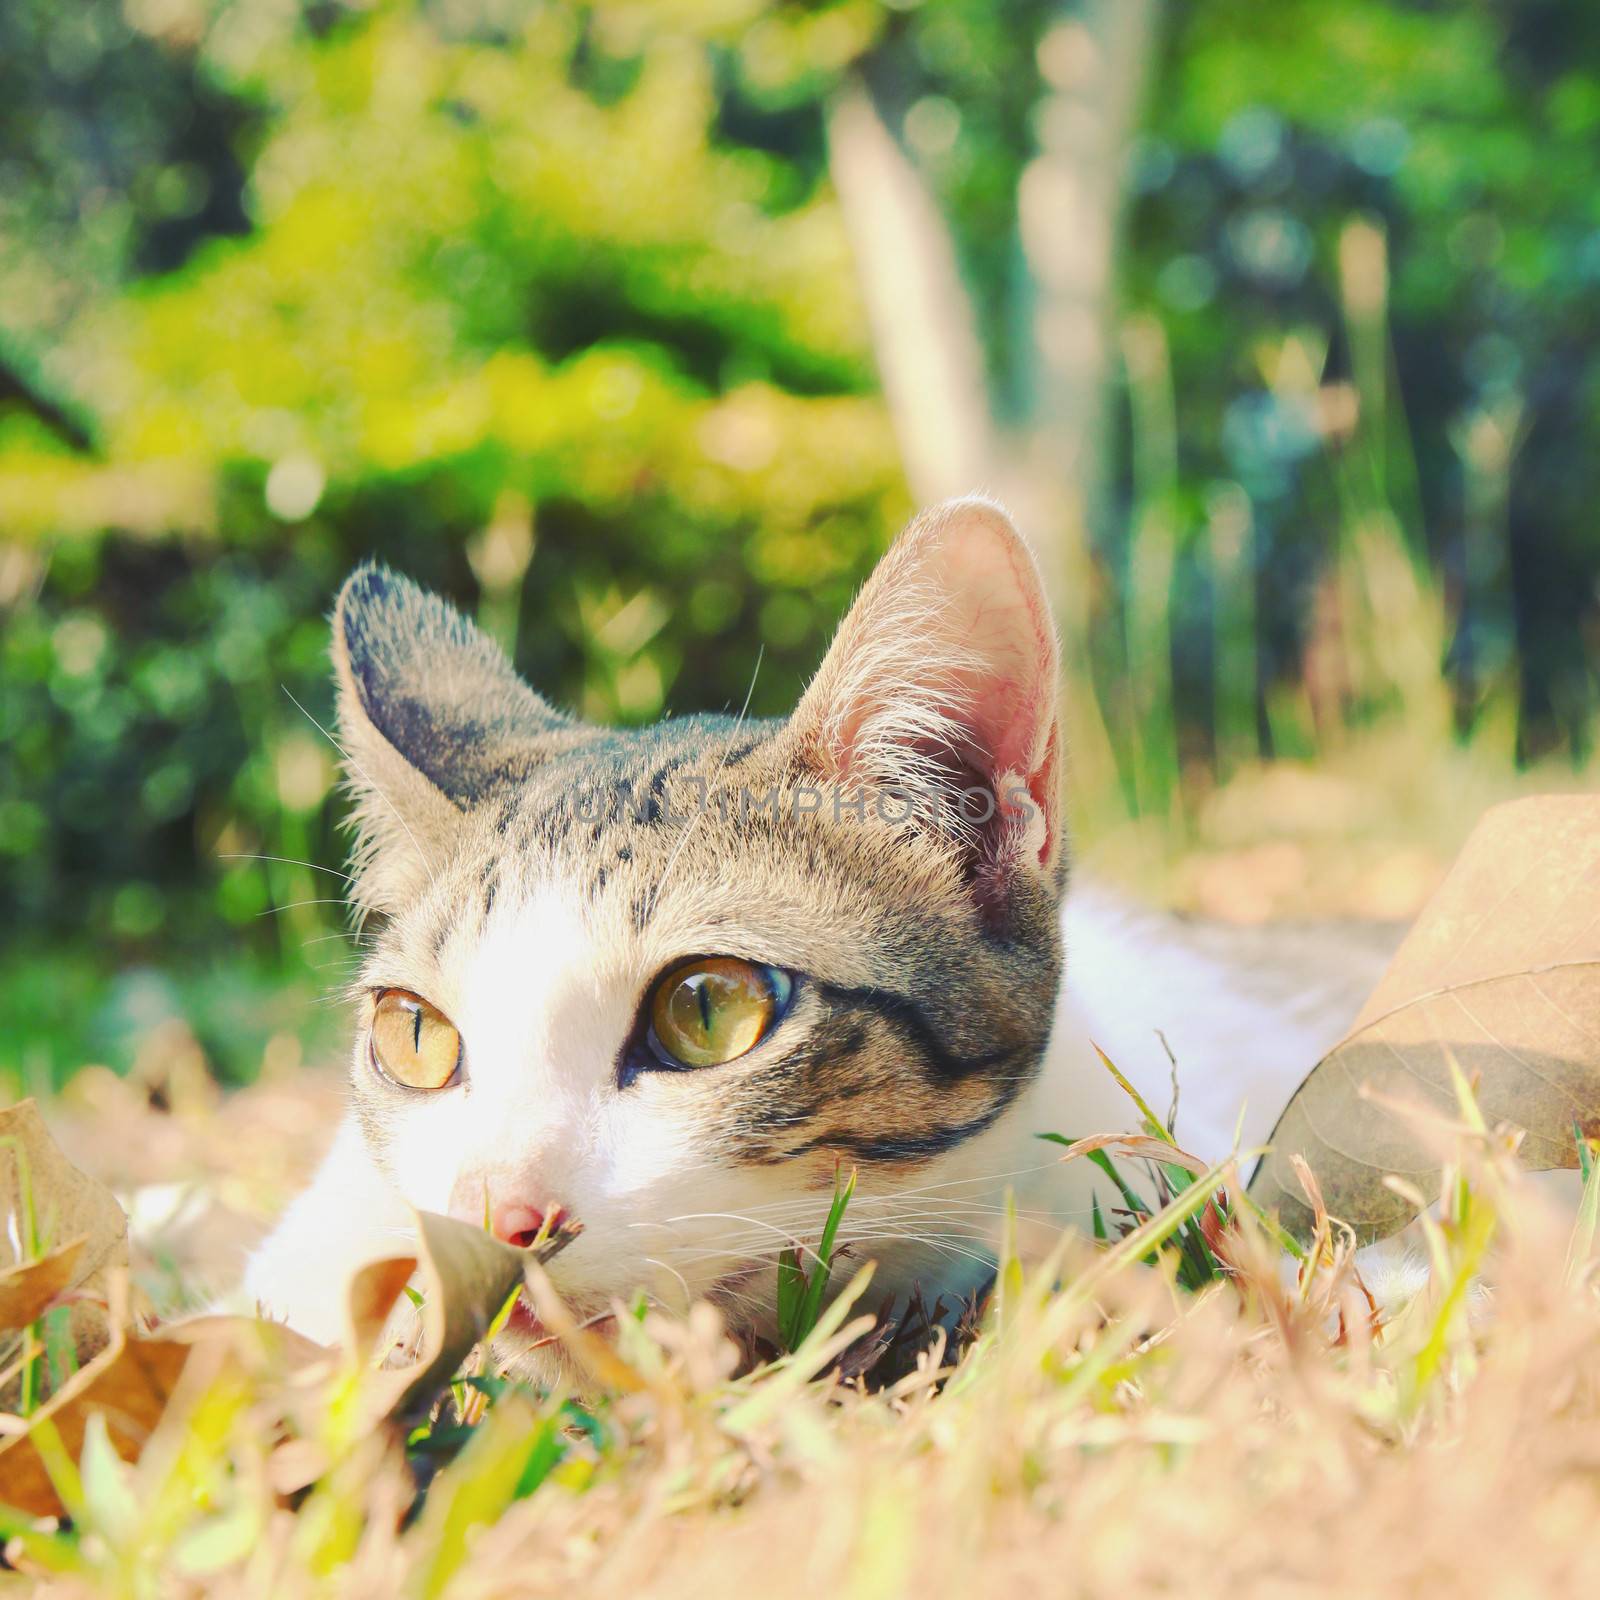 lonely cat lying on grass in the garden, retro filter effect by nuchylee